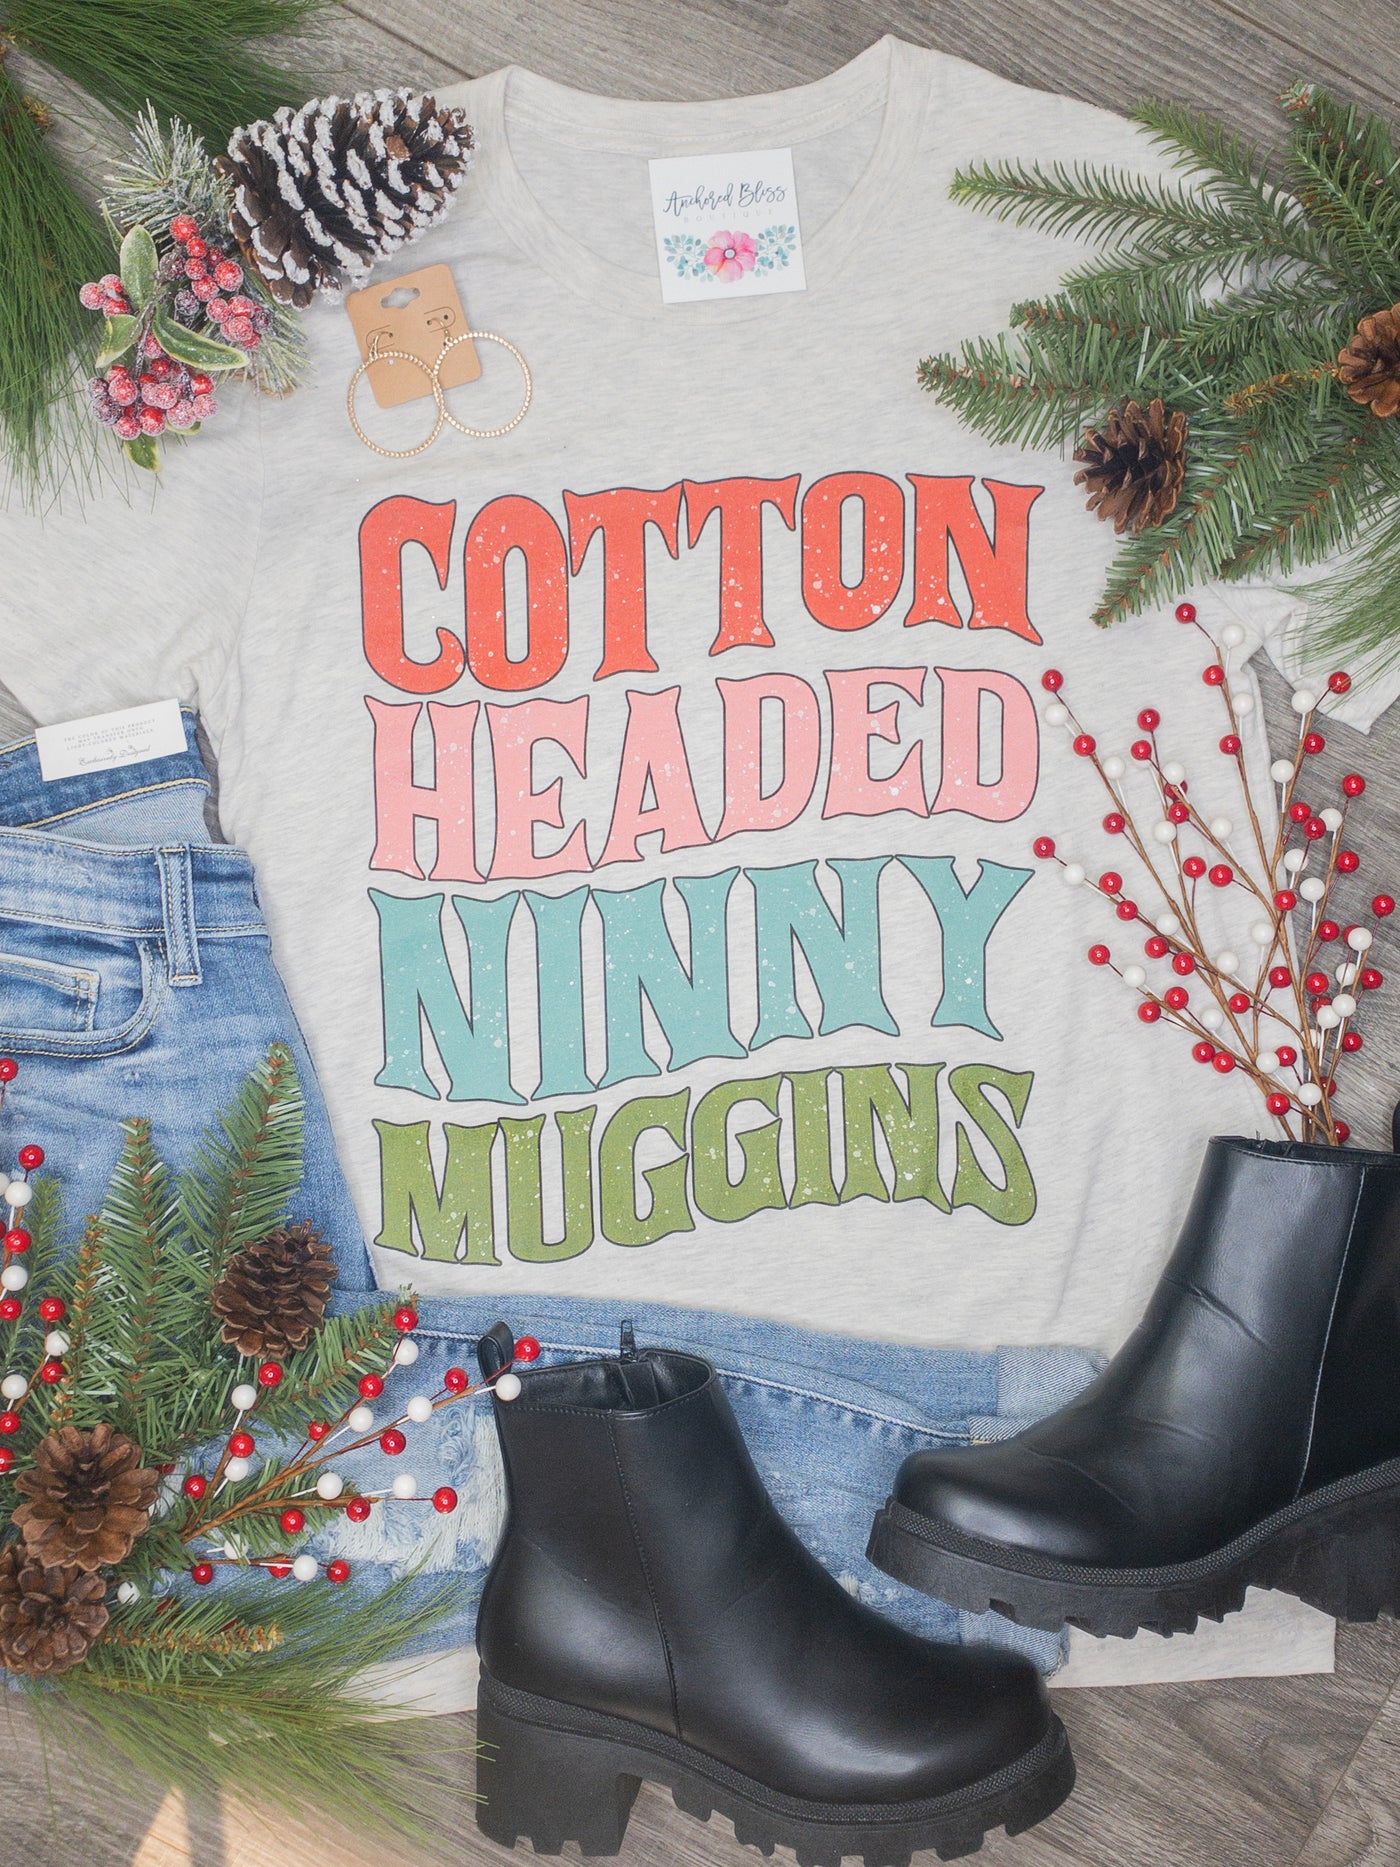 Cotton Headed Ninny Muggins Graphic Tee-Harps & Oli-Shop Anchored Bliss Women's Boutique Clothing Store